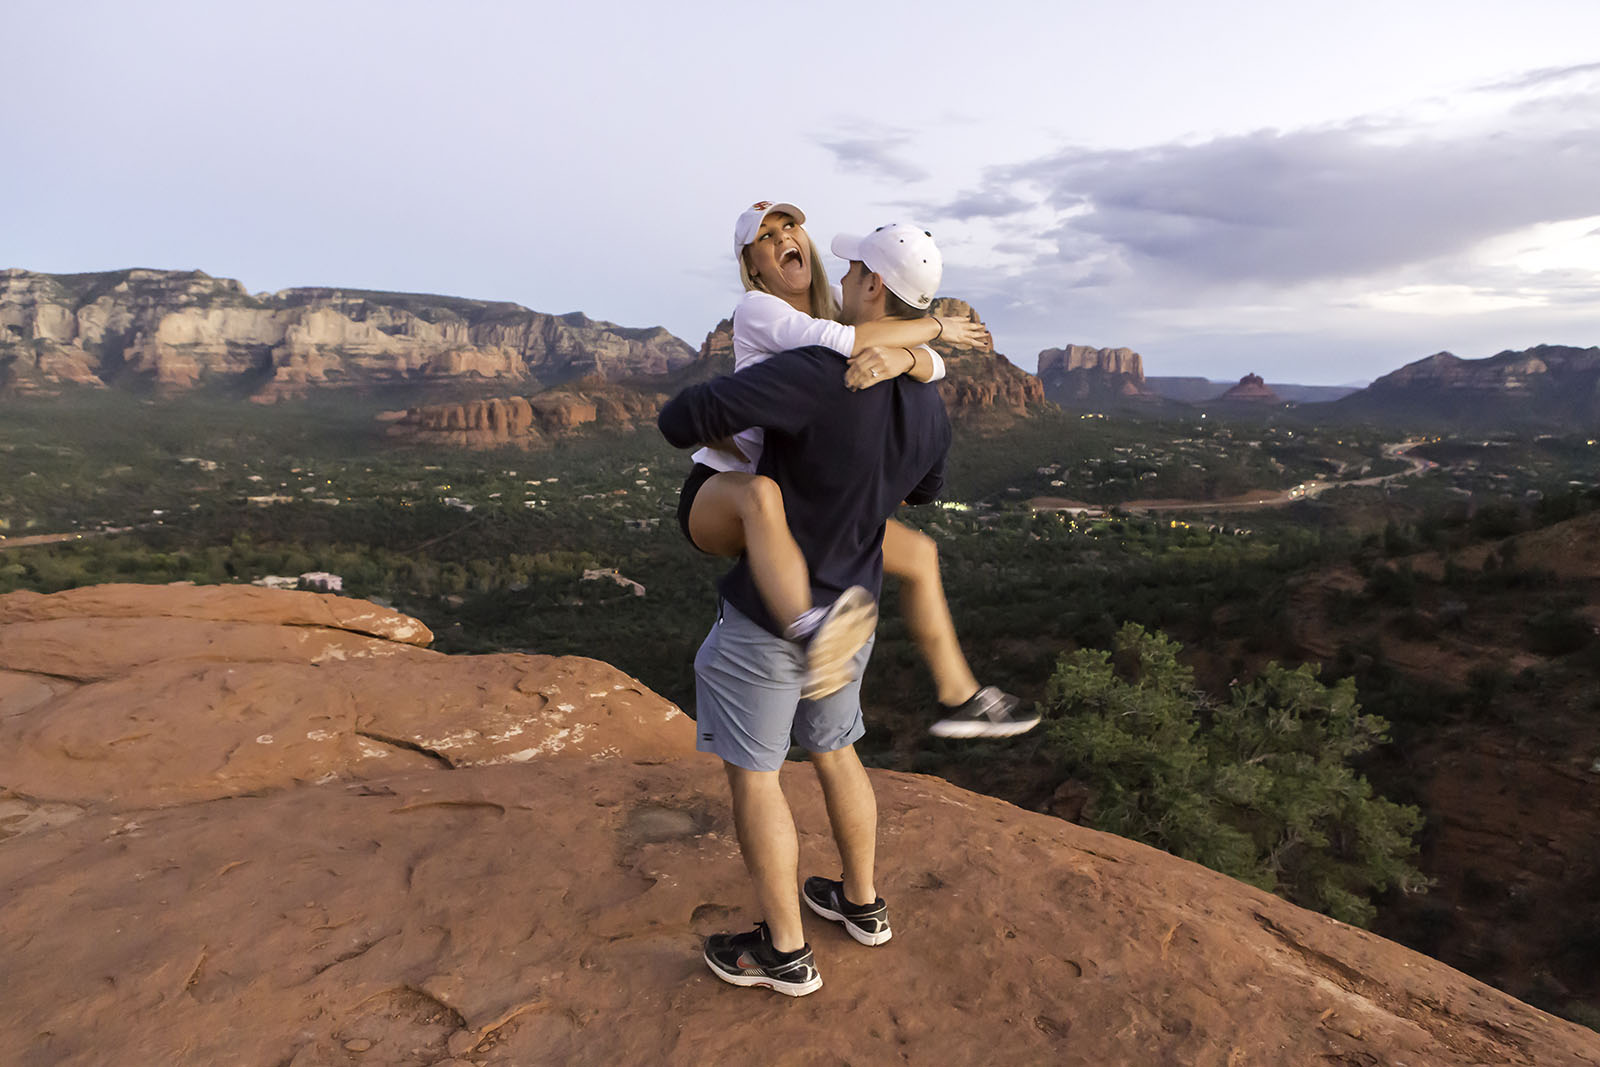 Excited bride to be jumps on her fiance when given a surprise wedding ring while on vacation in Sedona